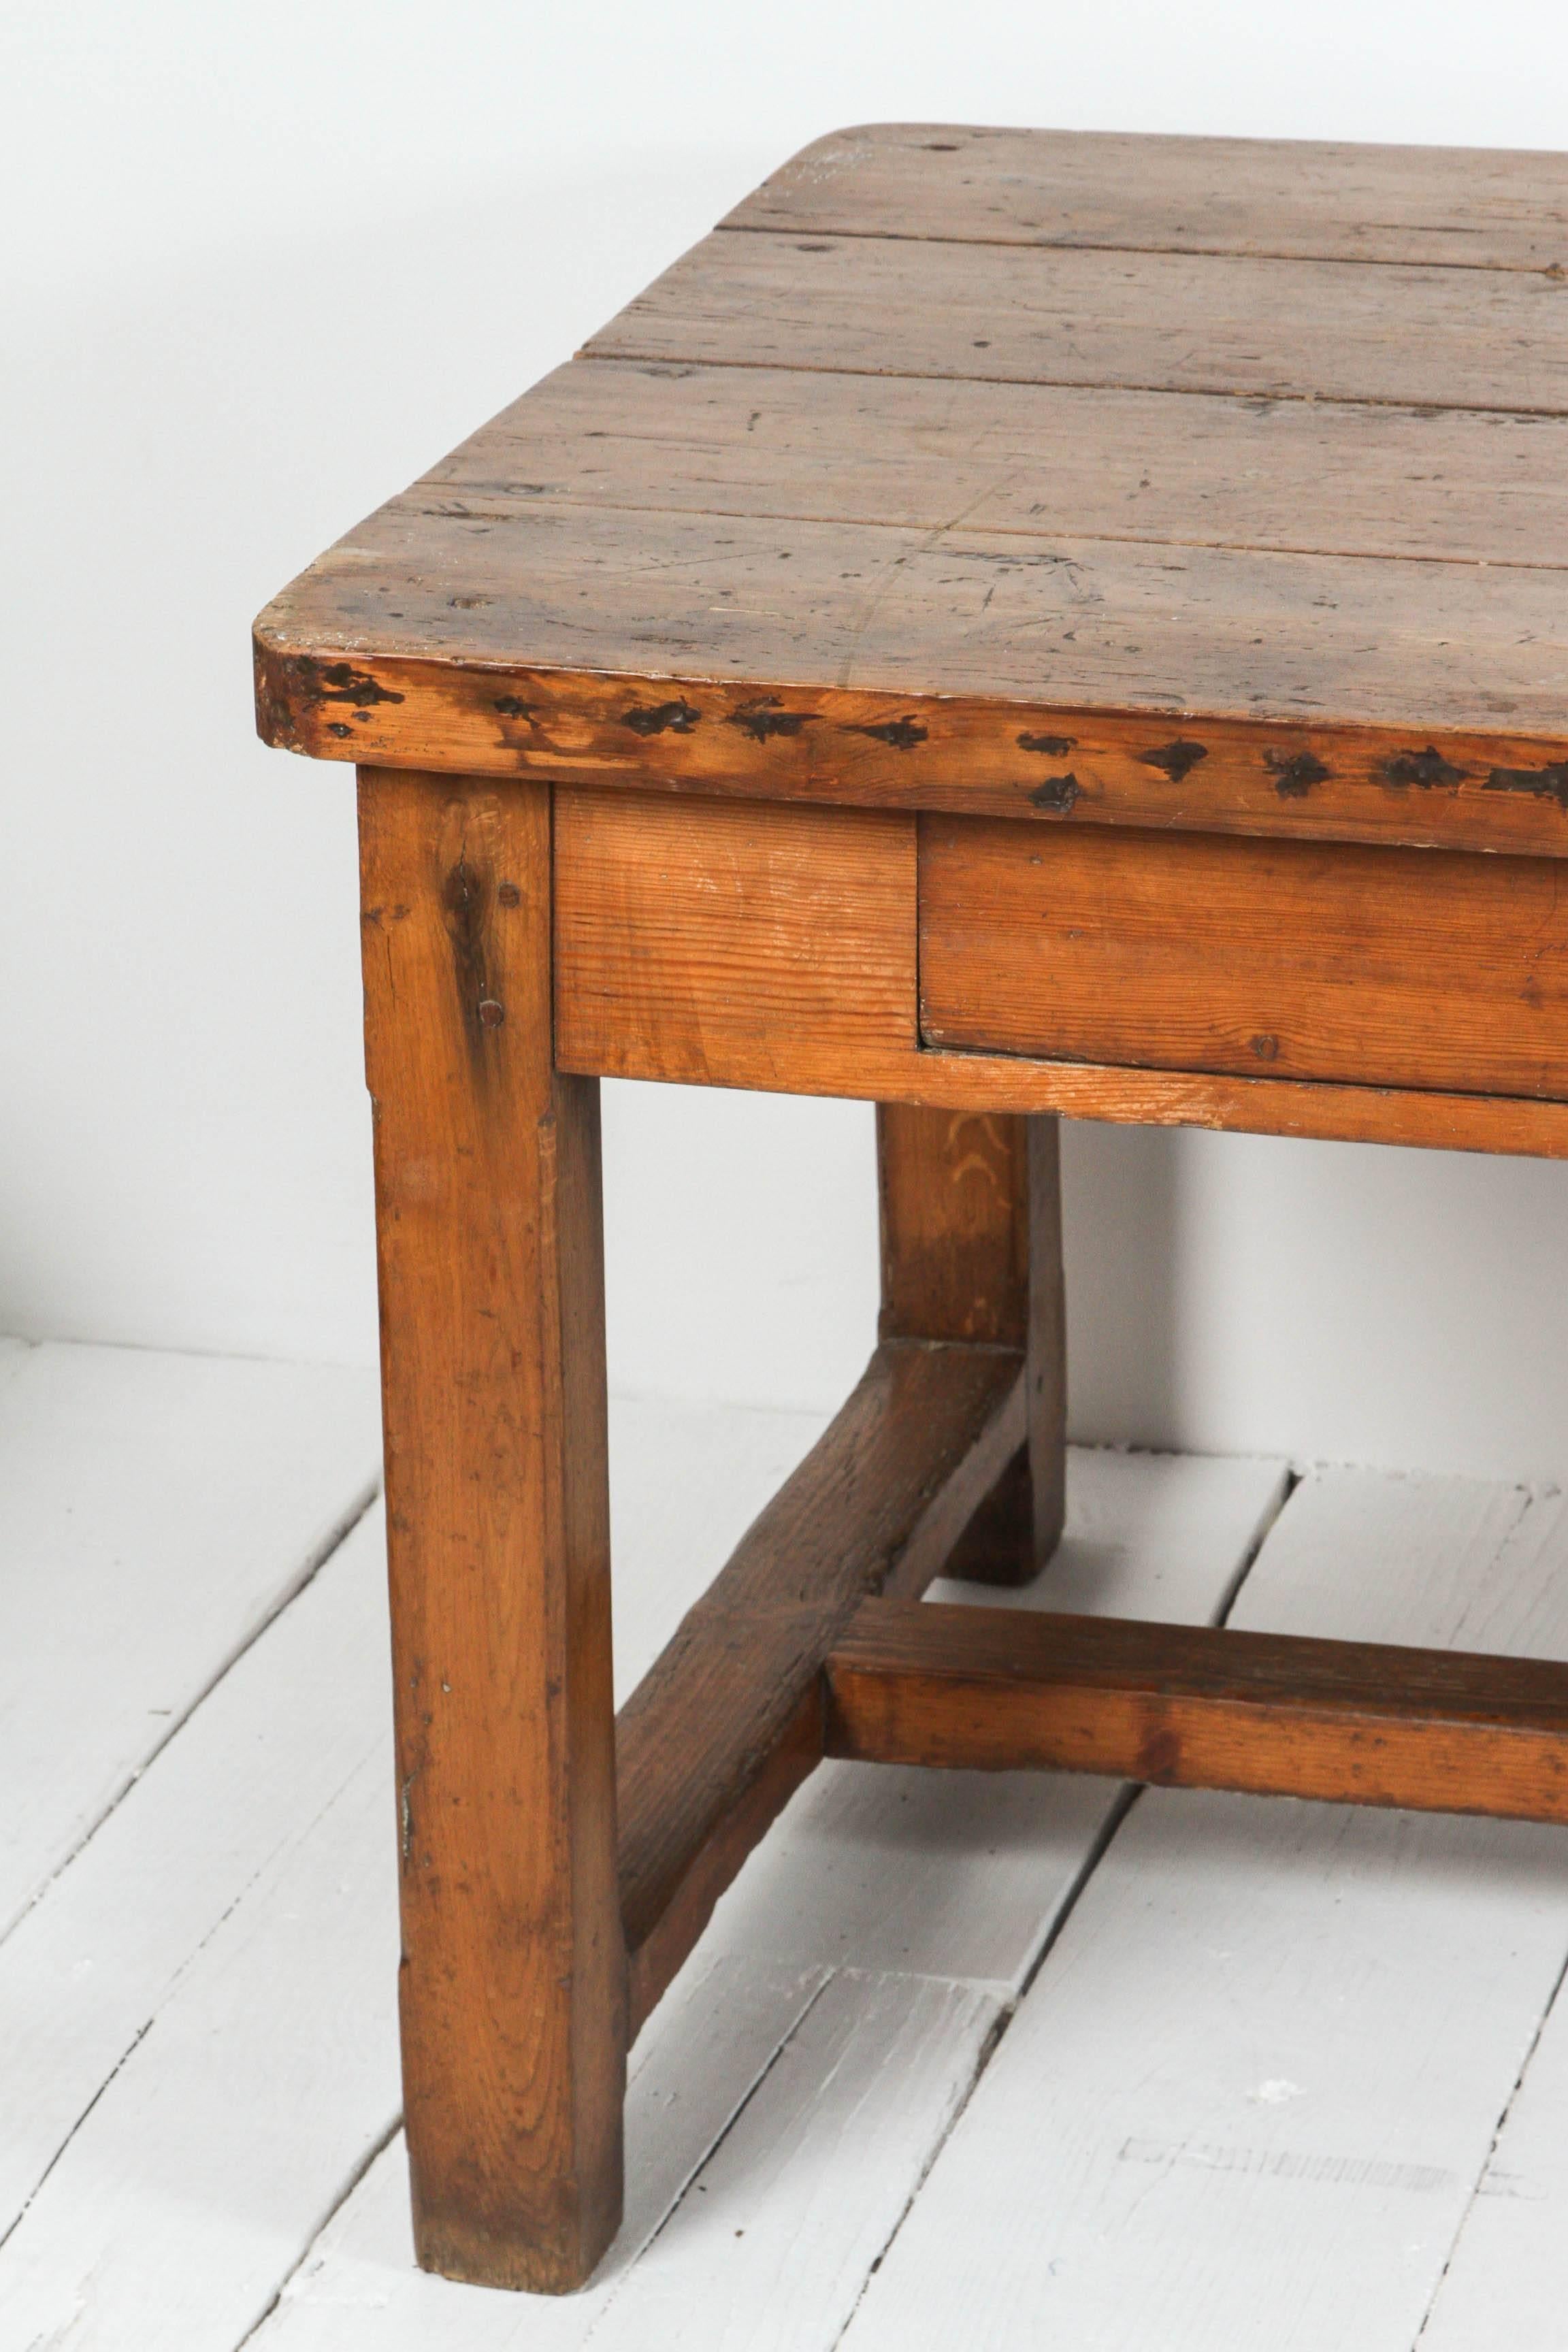 French farm table with two drawers.